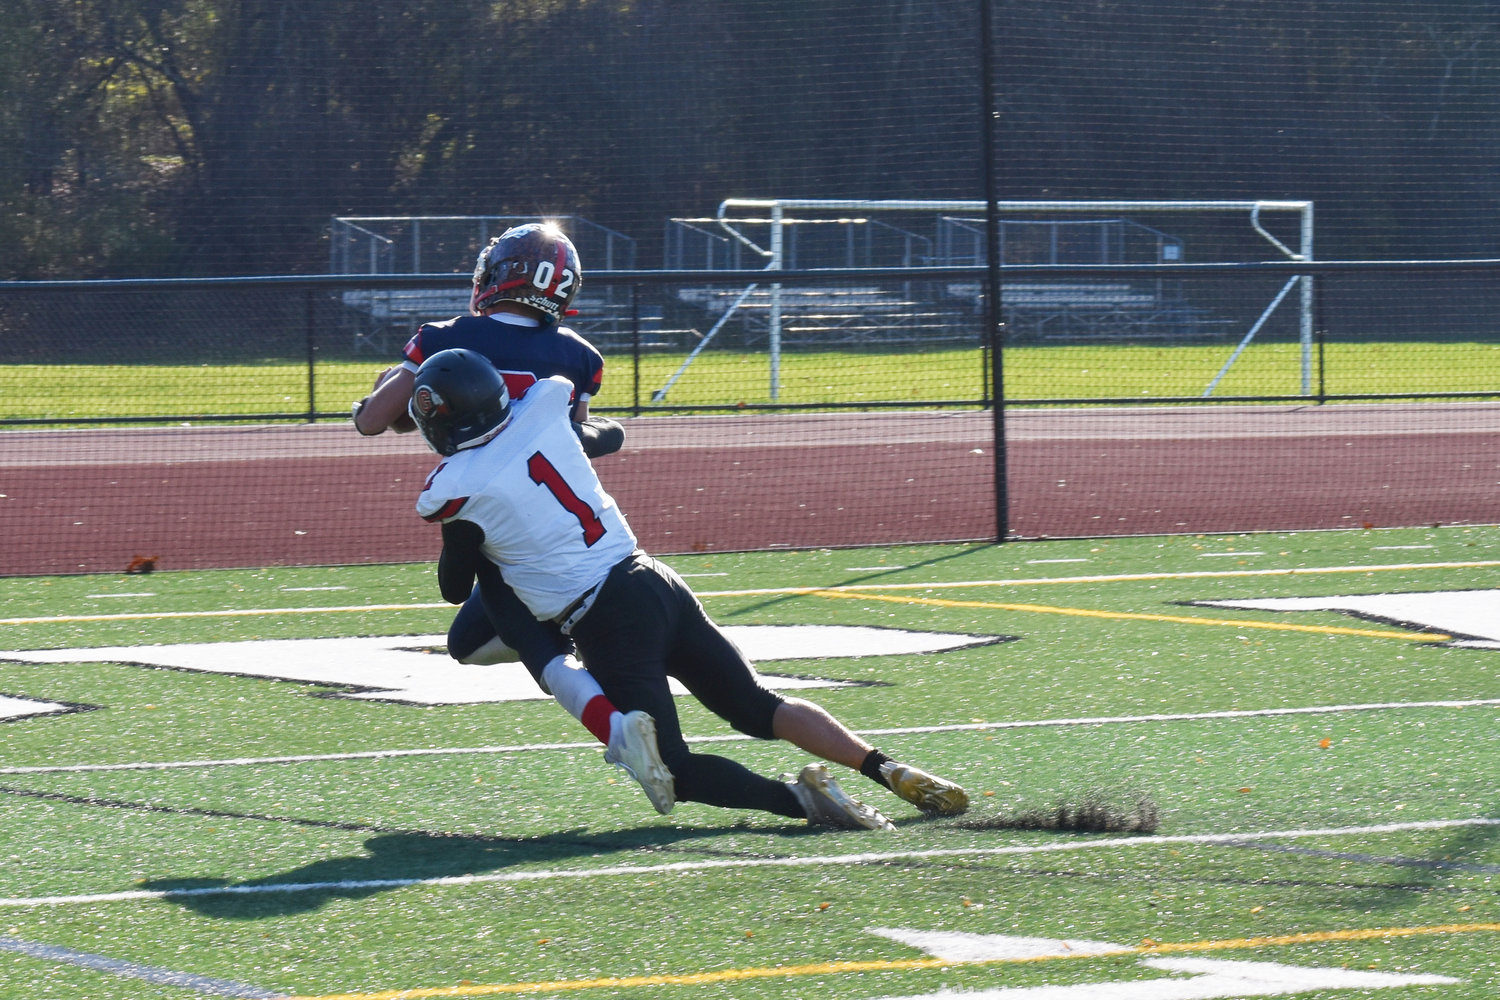 Austin Hartman, the shifty running Bears quarterback, broke away from the Groton defense for a 47-yard touchdown rush in the first quarter. It was his first of two touchdowns in the regional loss to the Indians.